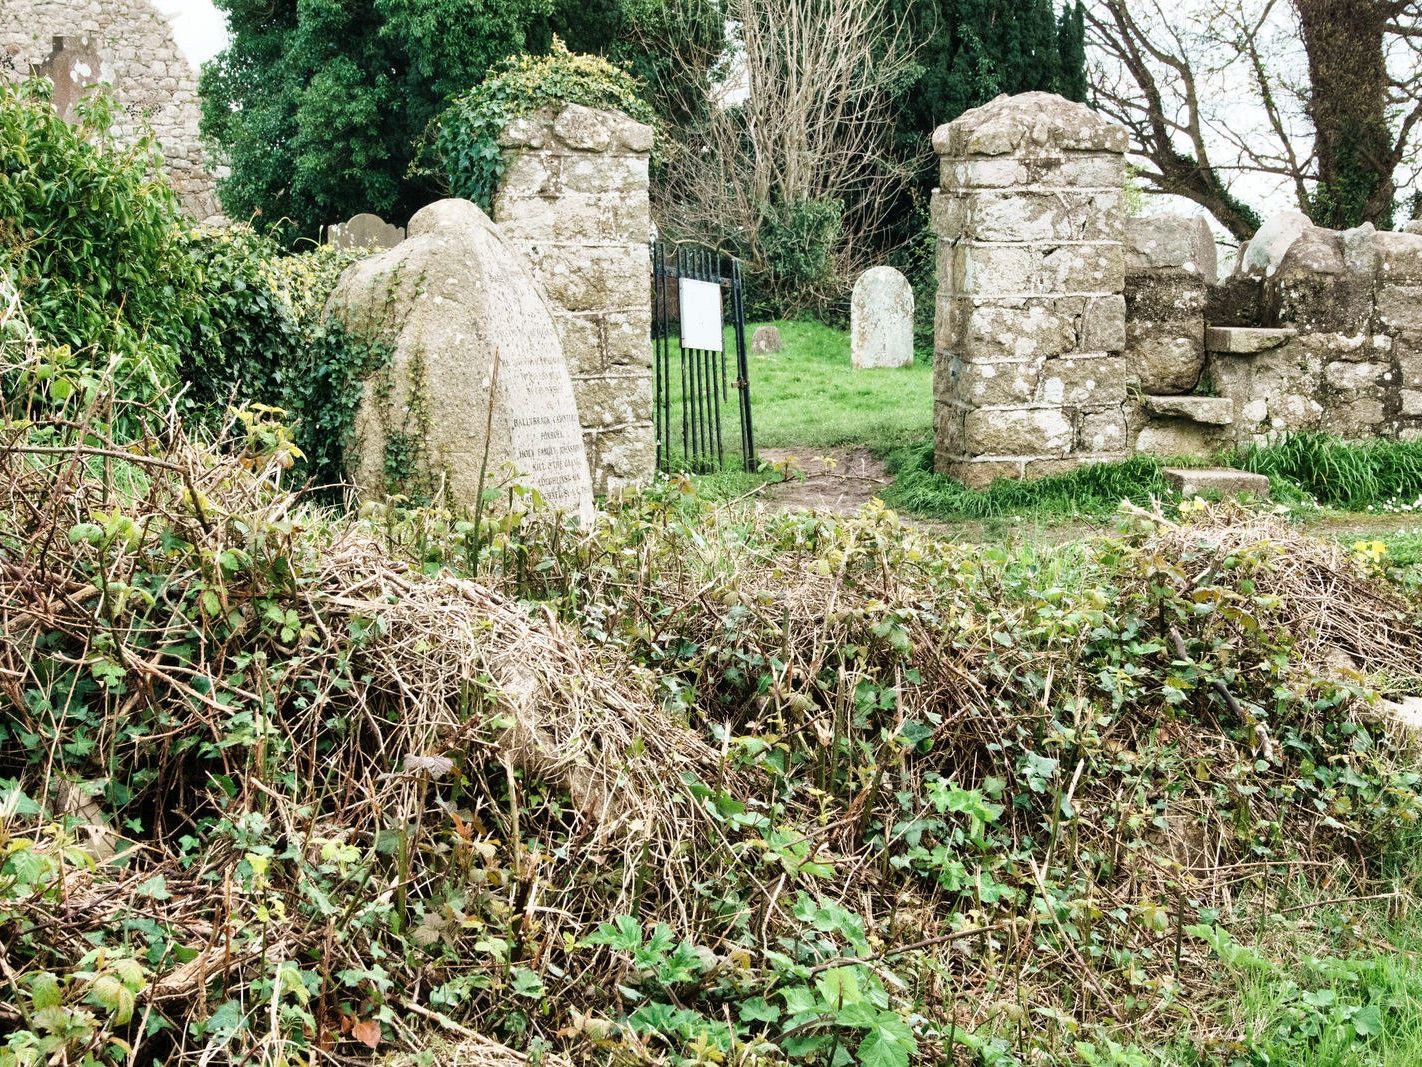 TWO CROSSES AND TULLY CHURCH AT LAUGHANSOWN LANE [THE CHURCH AND GRAVES]-223539-1